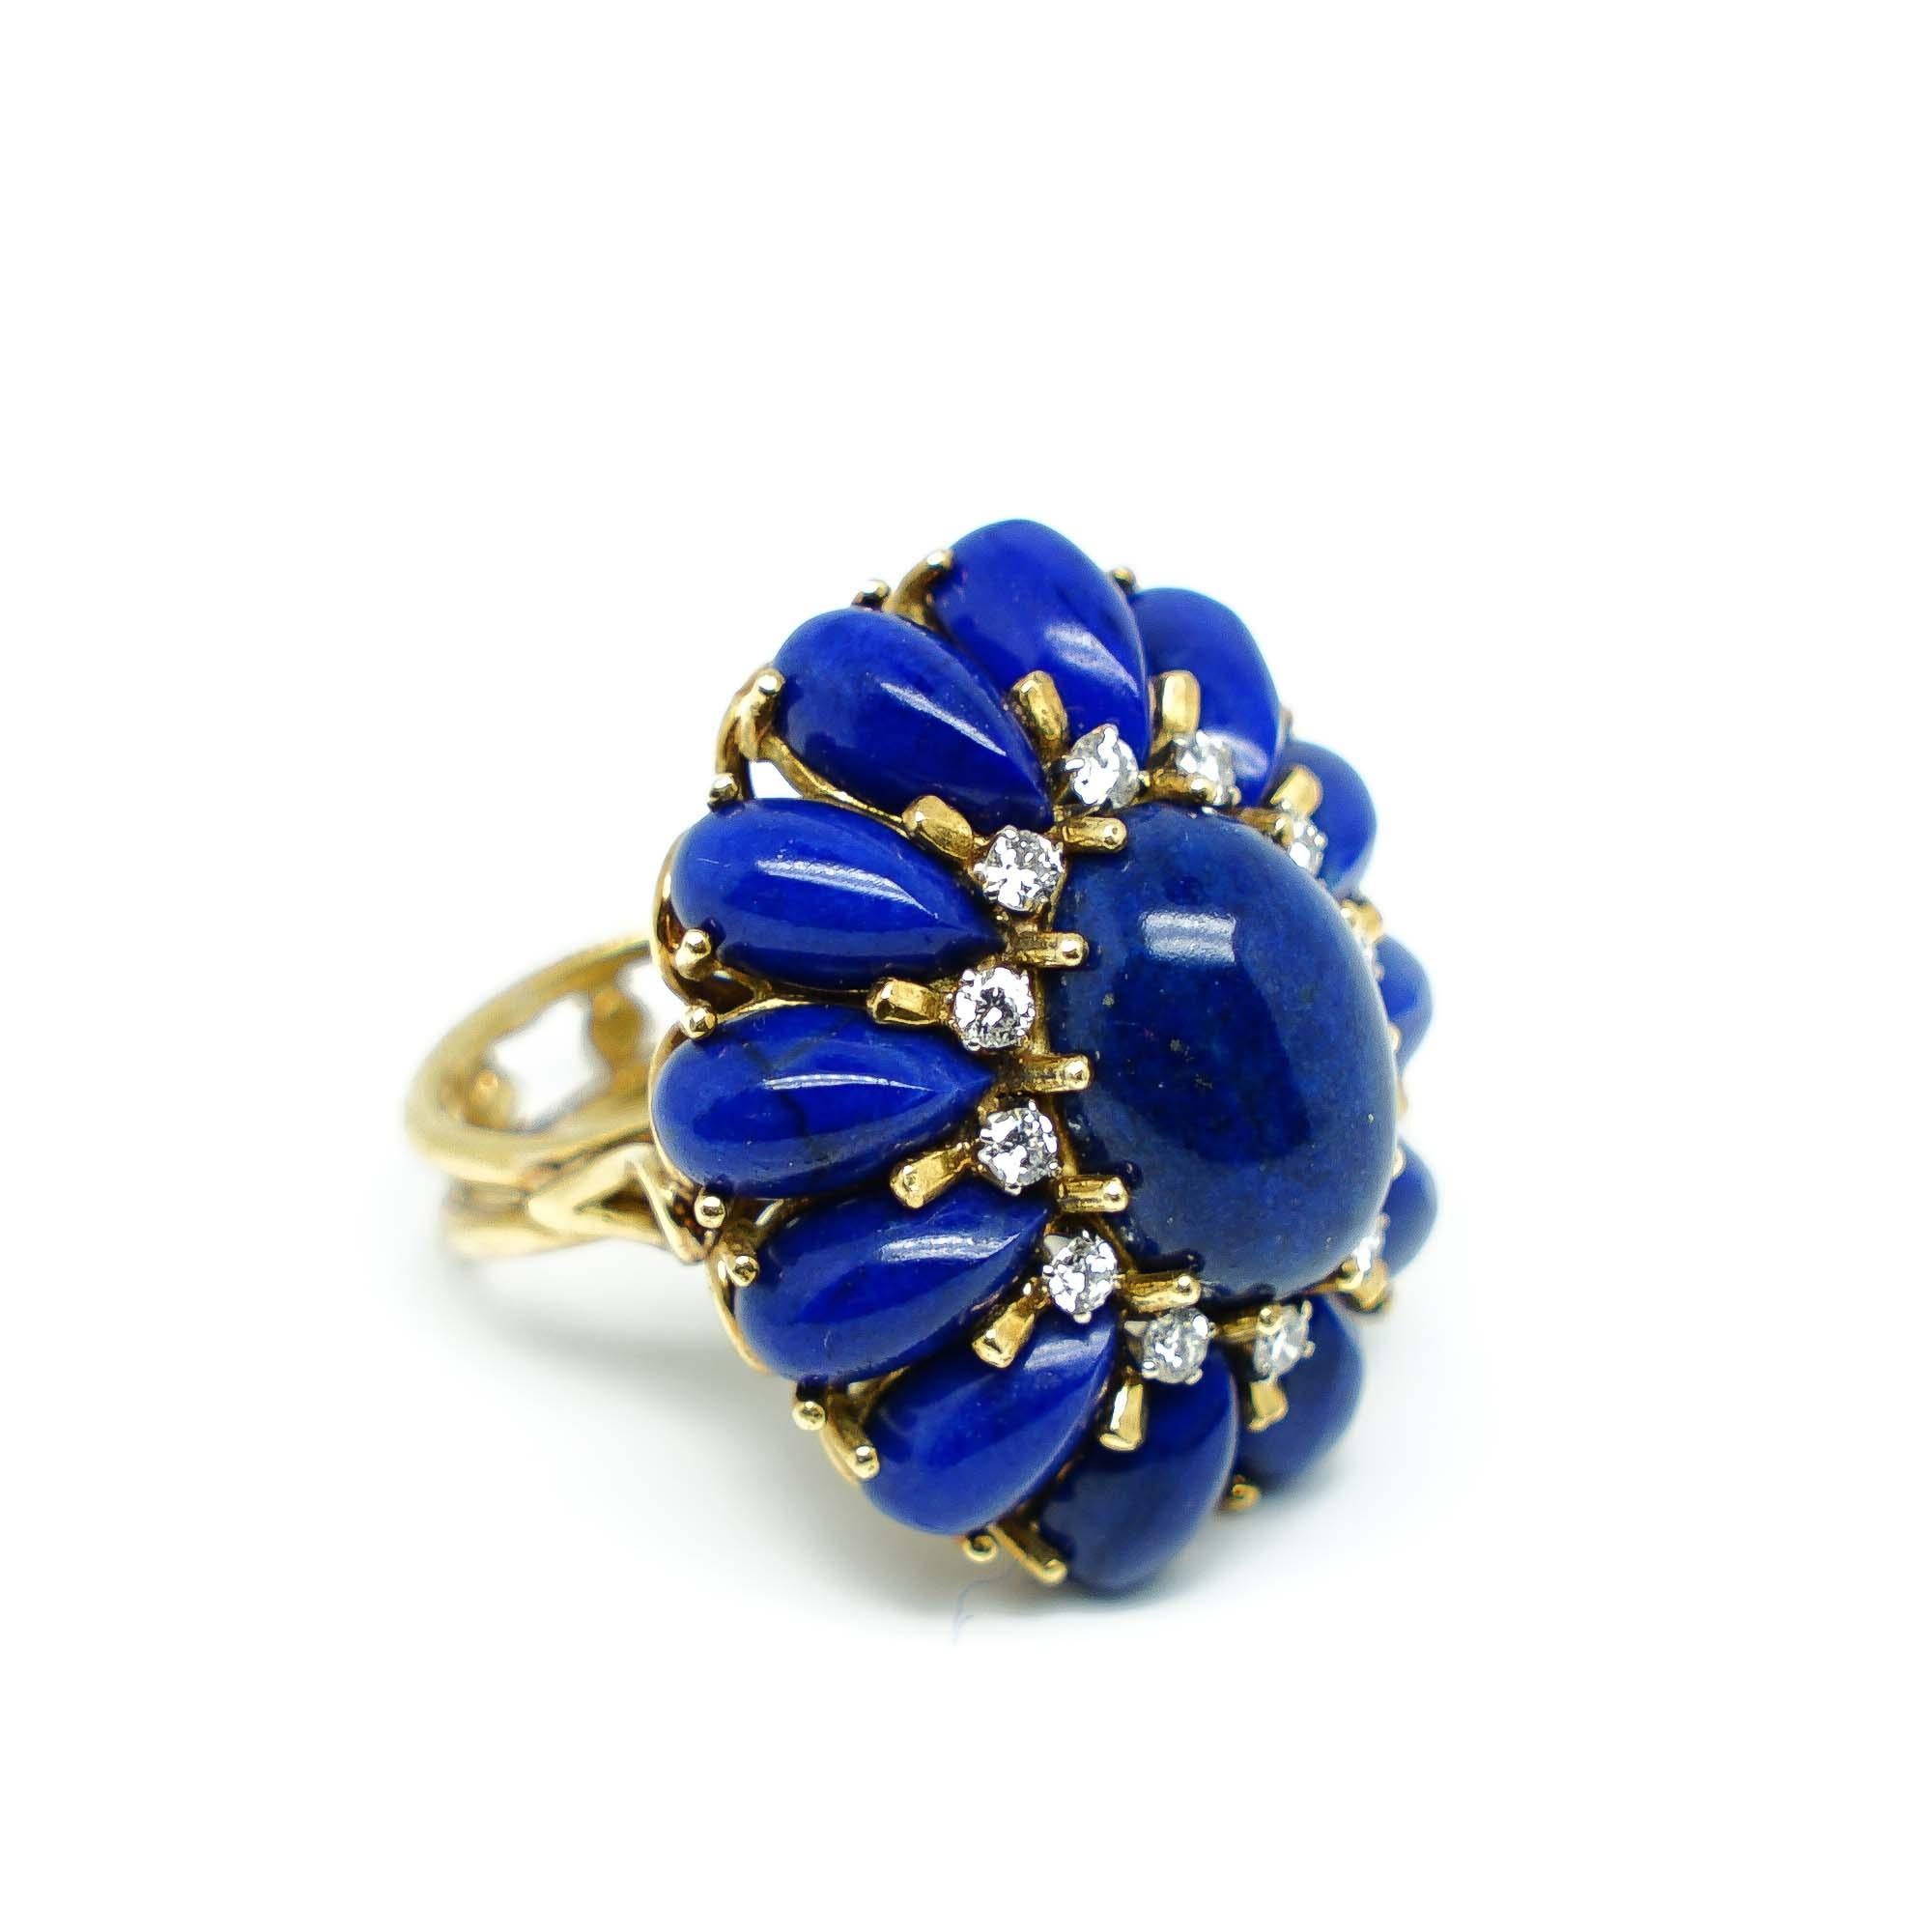 Flower Ring in Gold 18 karats with and intense Blue Lapis lazuli cabochon and Diamonds. It's a piece that has a strong and Original Design with a beautiful detailed structure totally Handmade that makes it Unique and a real Piece of Art to wear or